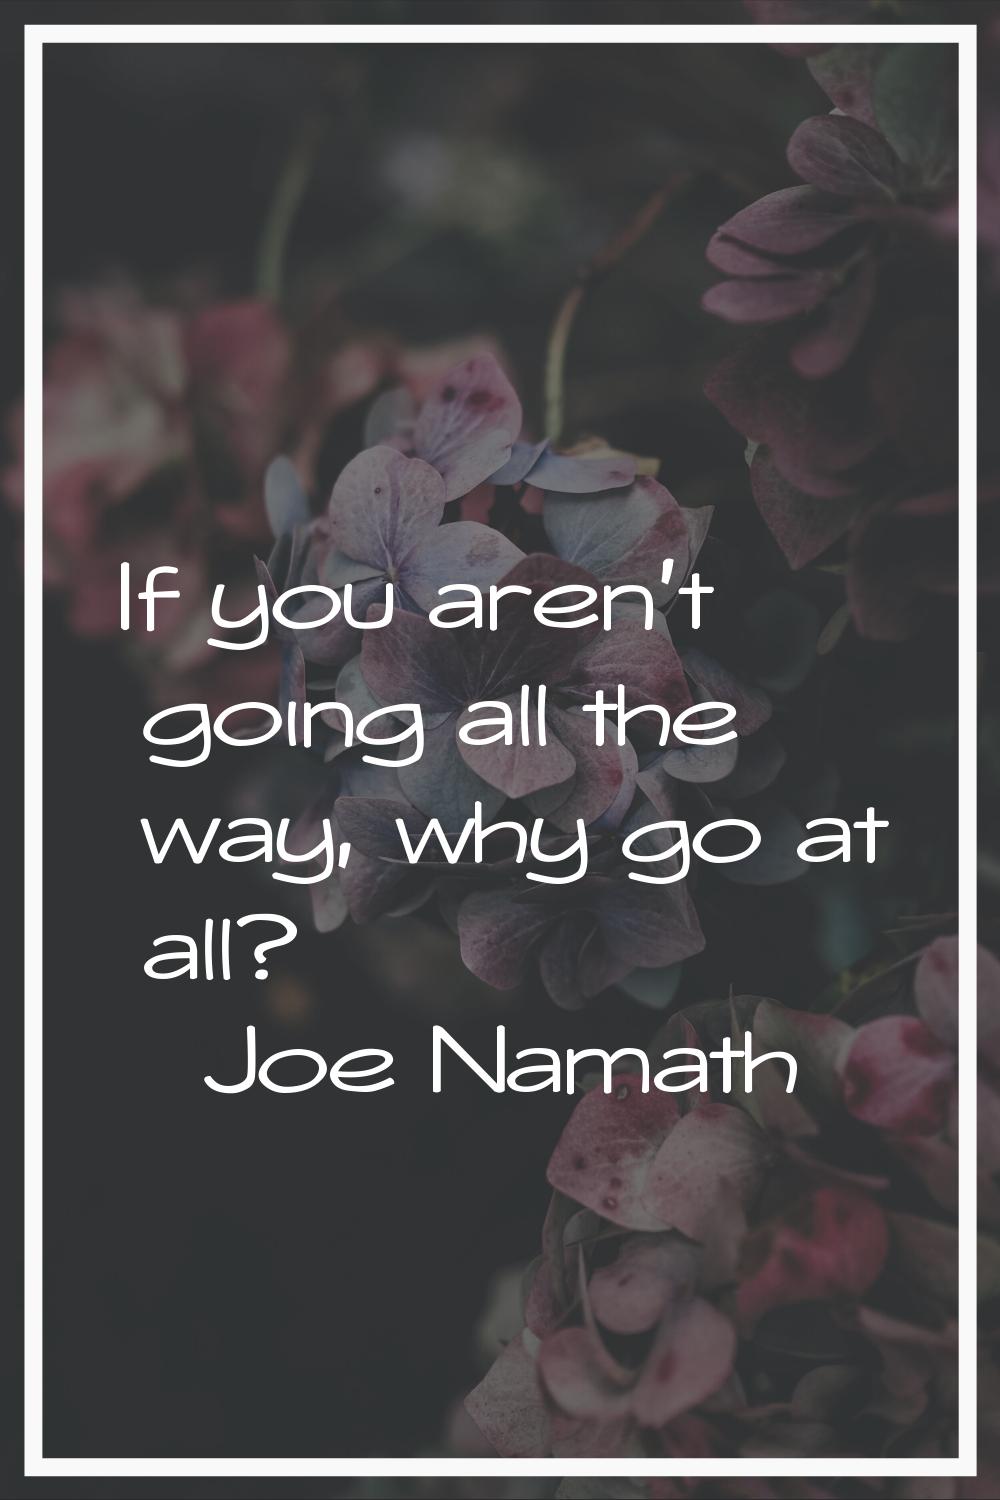 If you aren't going all the way, why go at all?